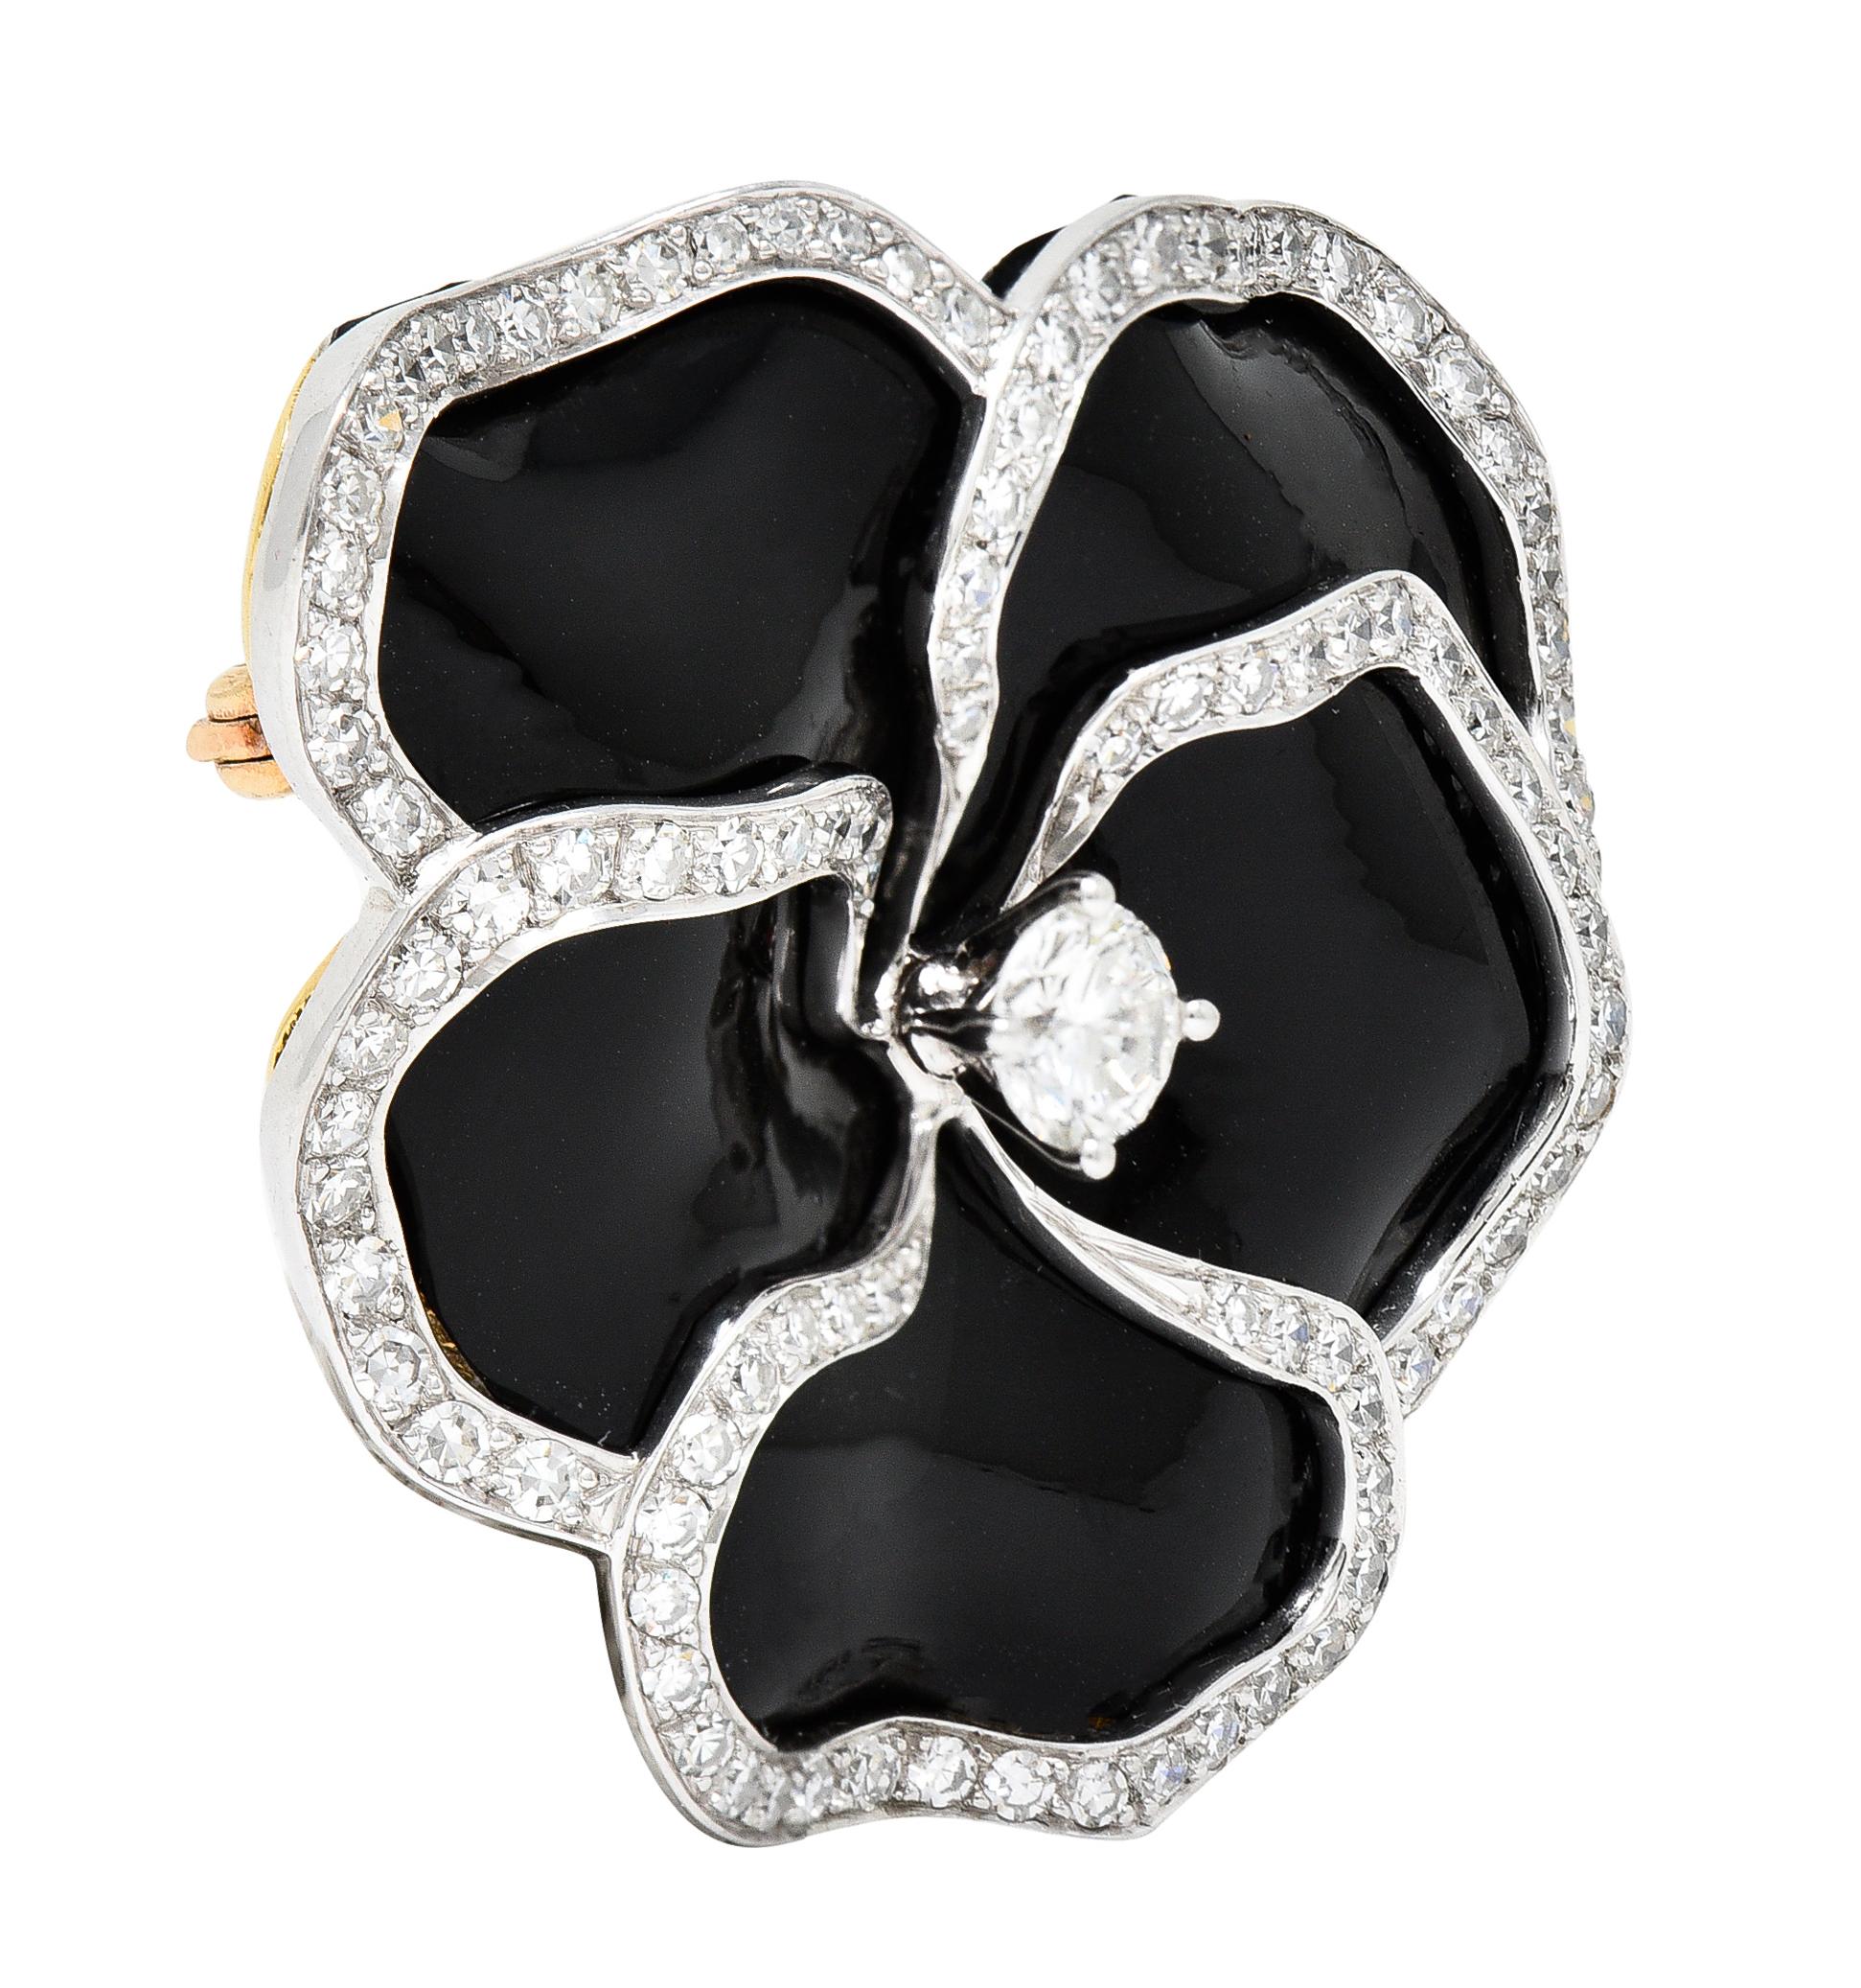 Brooch is designed as a stylized pansy flower with a platinum diamond frame riveted over glossy black vinyl fabric and backed by 18 karat yellow gold. Can be disassembled via screw mechanism at back to change fabric material. Centers a round